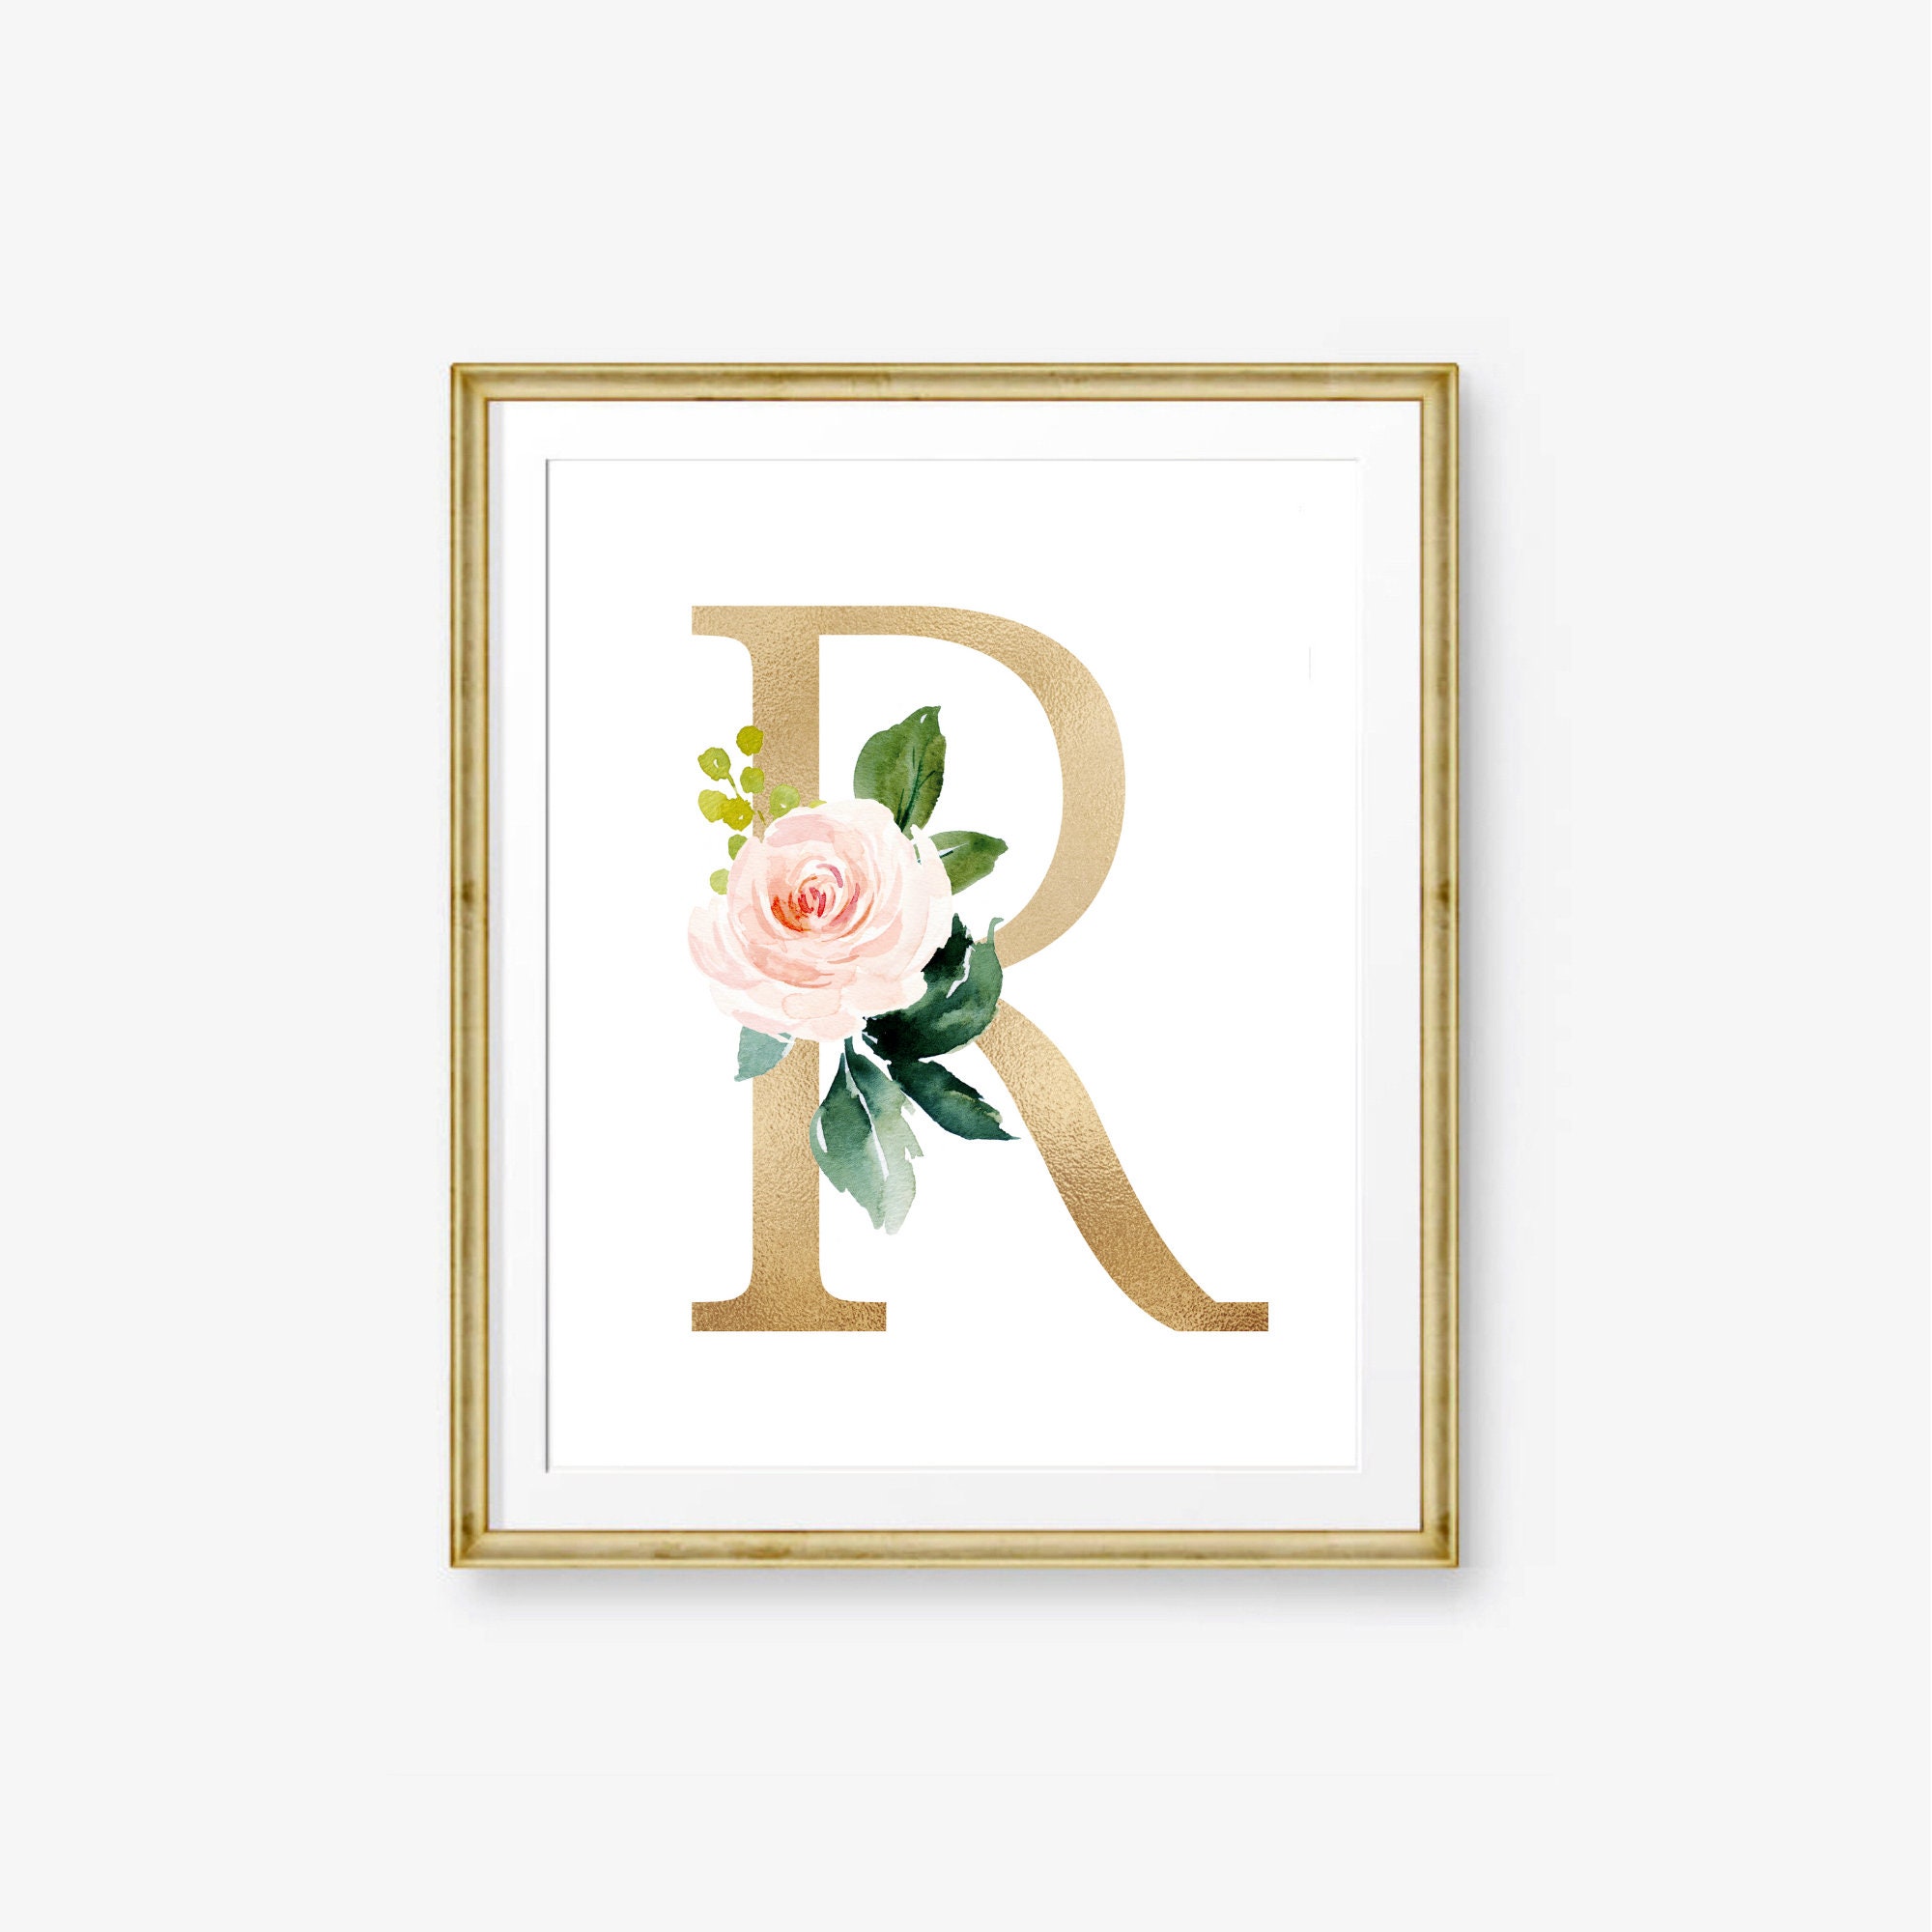  3dRose Letter J Personal Vintage Gold Royal Monogram  Personalized Initial Greeting Card (gc_275428_1) : Office Products